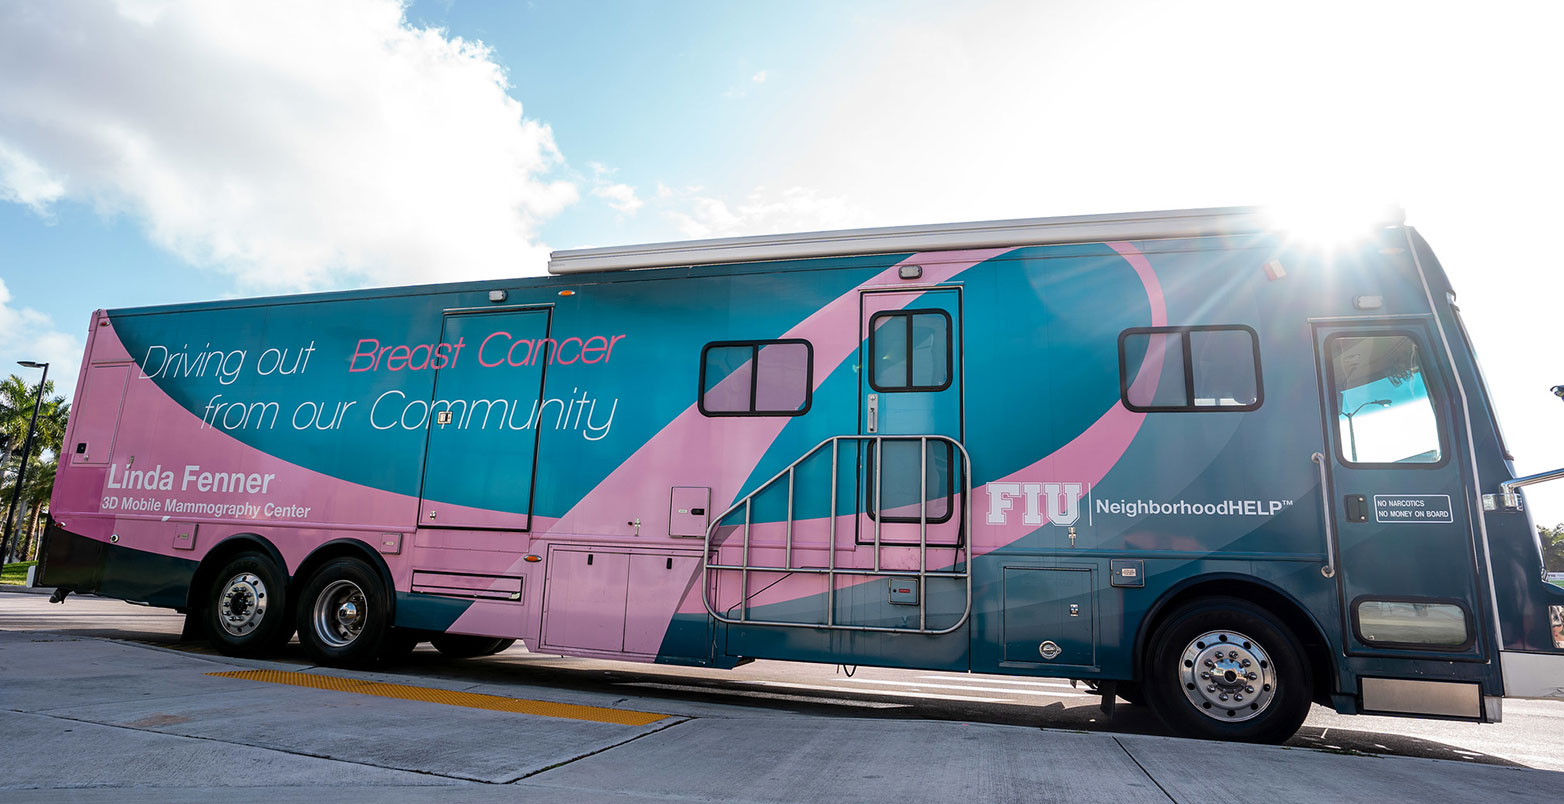 Linda Fenner 3D Mobile Mammography Center at FIU